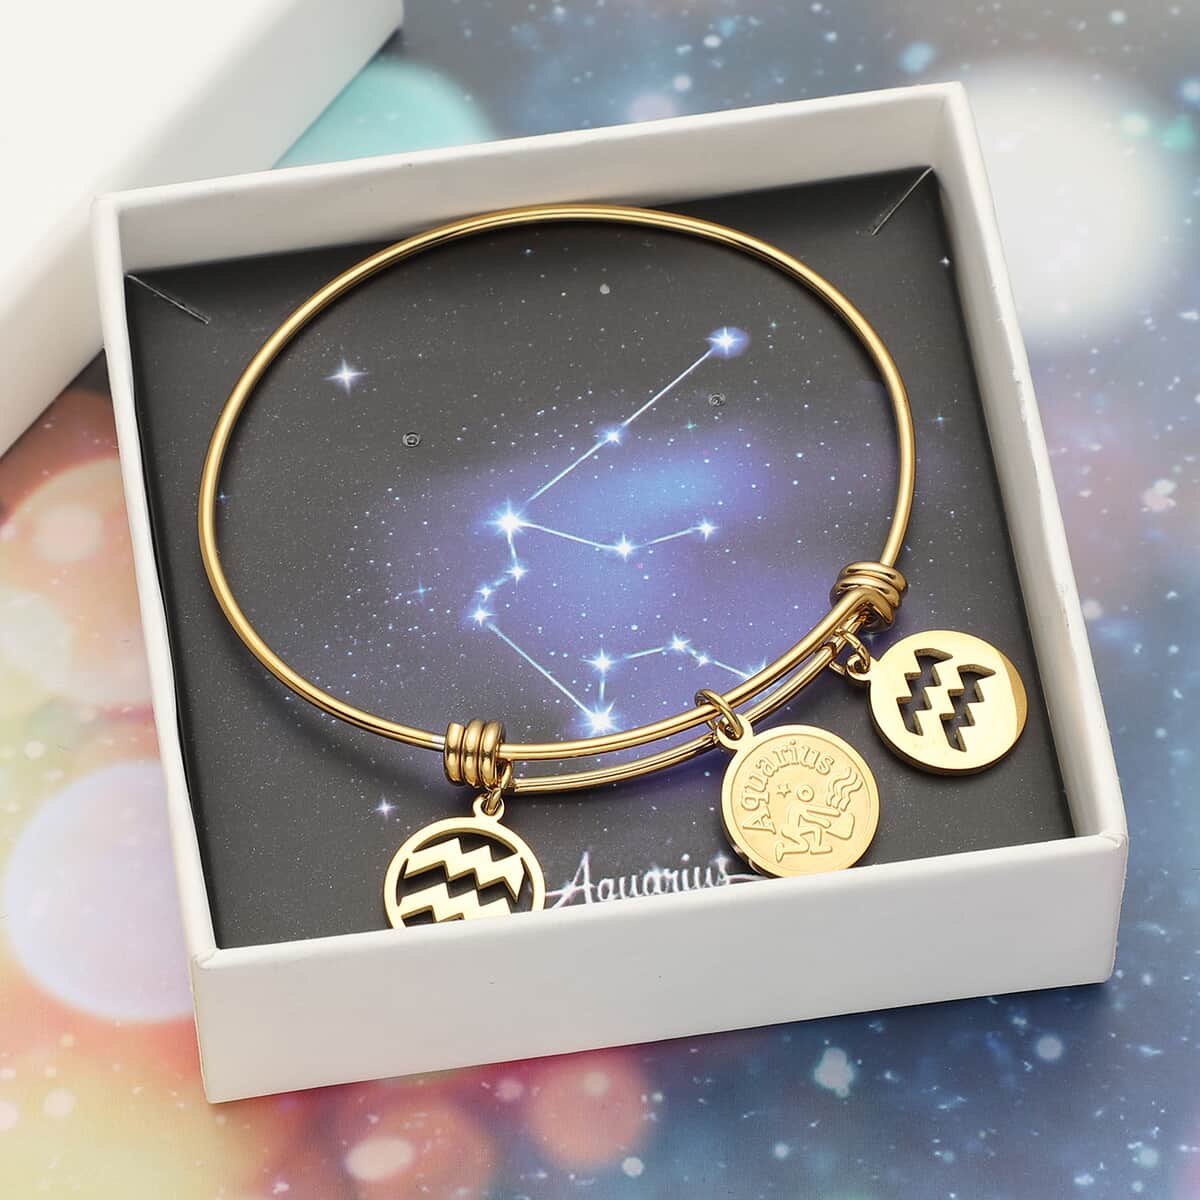 Aquarius Zodiac Bangle Bracelet Gift Set in ION Plated Yellow Gold Stainless Steel (6-9 in) image number 0